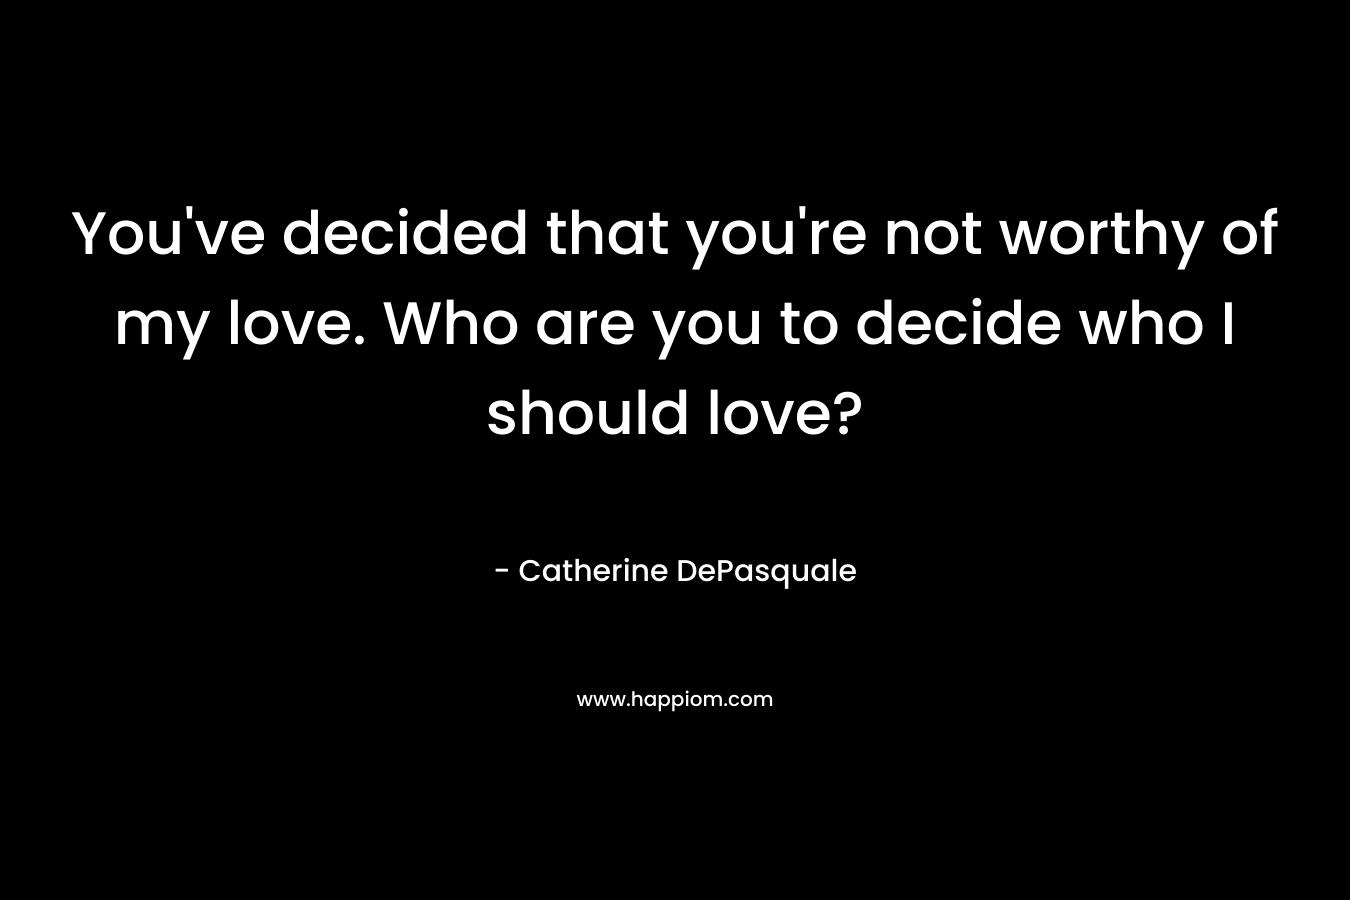 You’ve decided that you’re not worthy of my love. Who are you to decide who I should love? – Catherine DePasquale